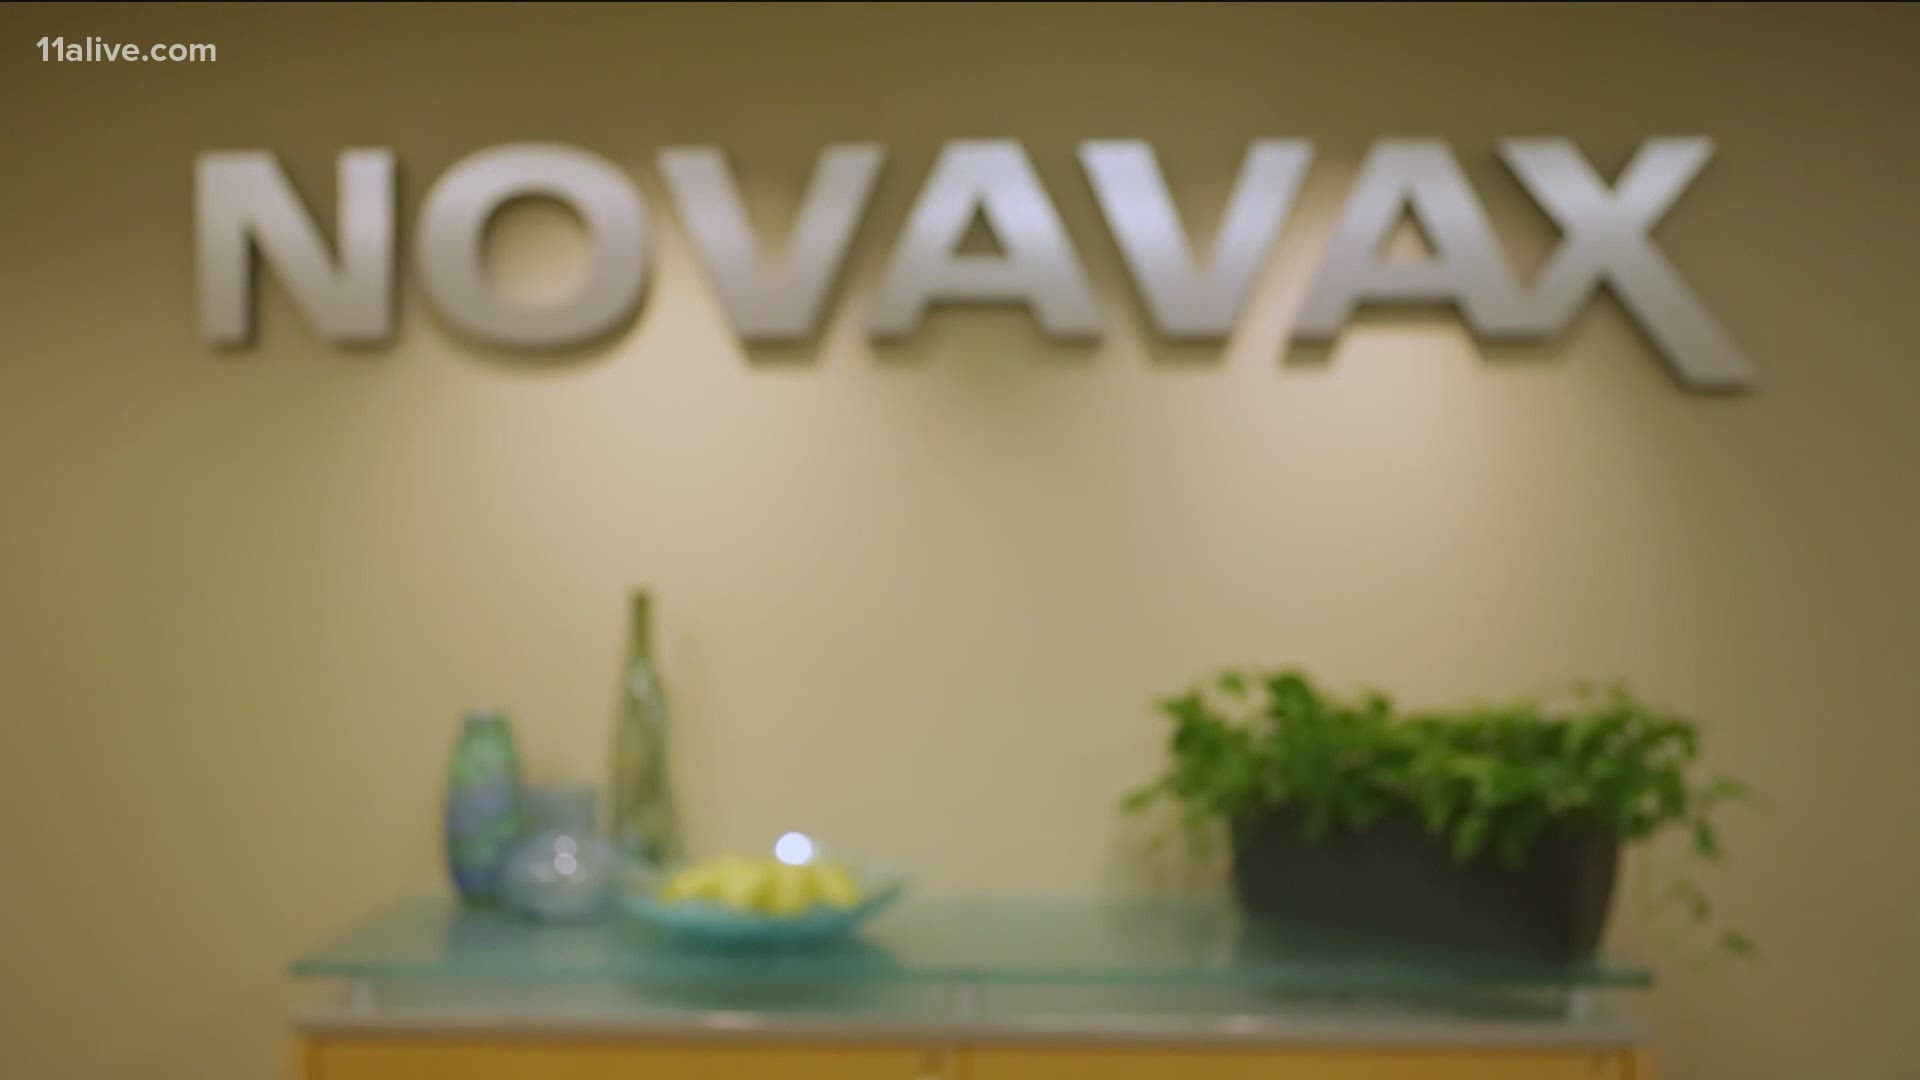 Novavax is a more traditional type of vaccine than the Pfizer and Moderna COVID shots already used to protect most Americans